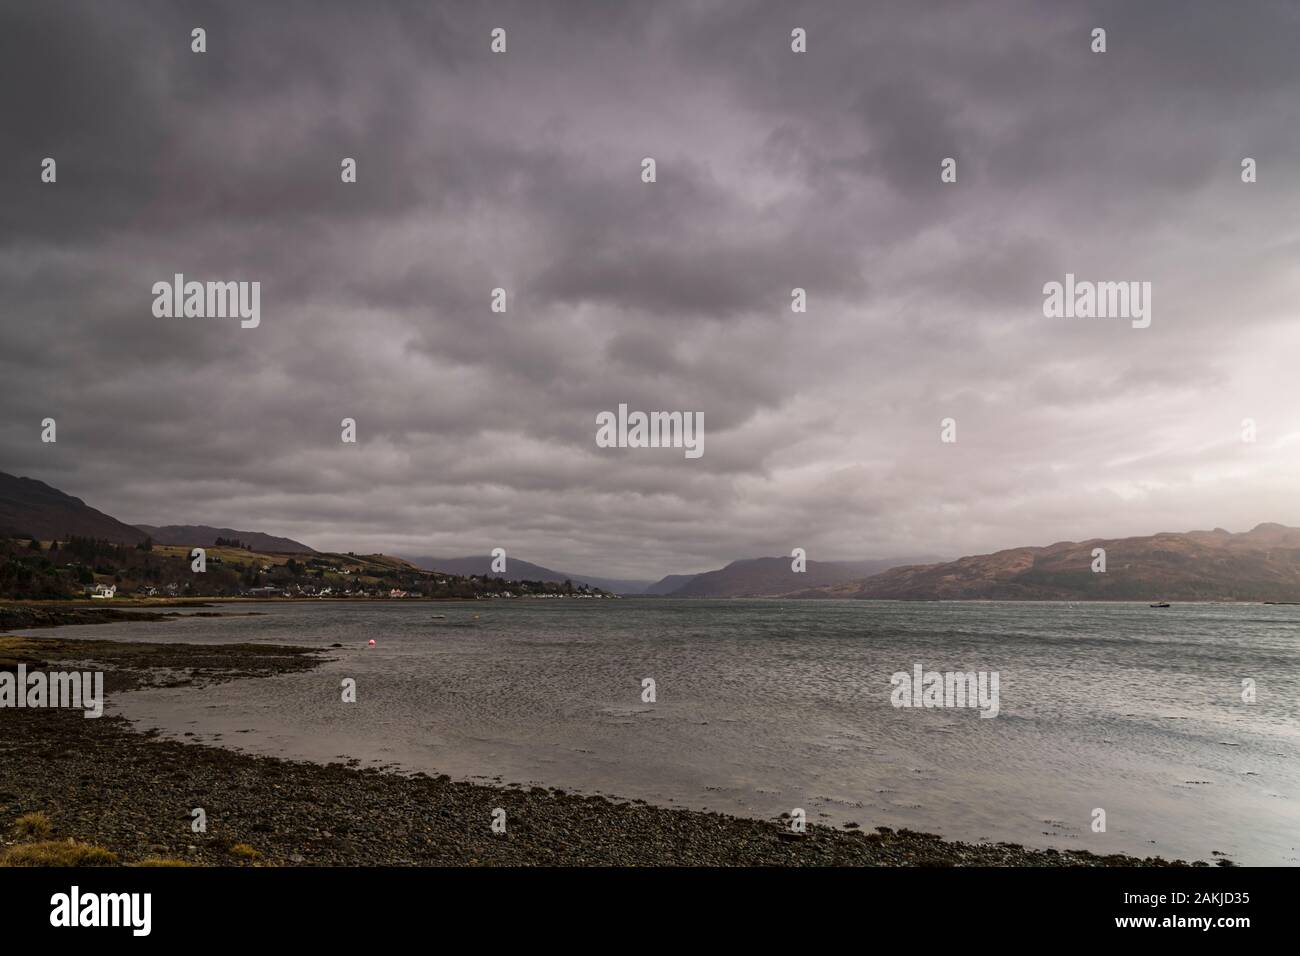 A bracketed hdr wet winter image of Loch Carron in Ross and Cromarty, Wester Ross, Scotland. 29 December 2019 Stock Photo